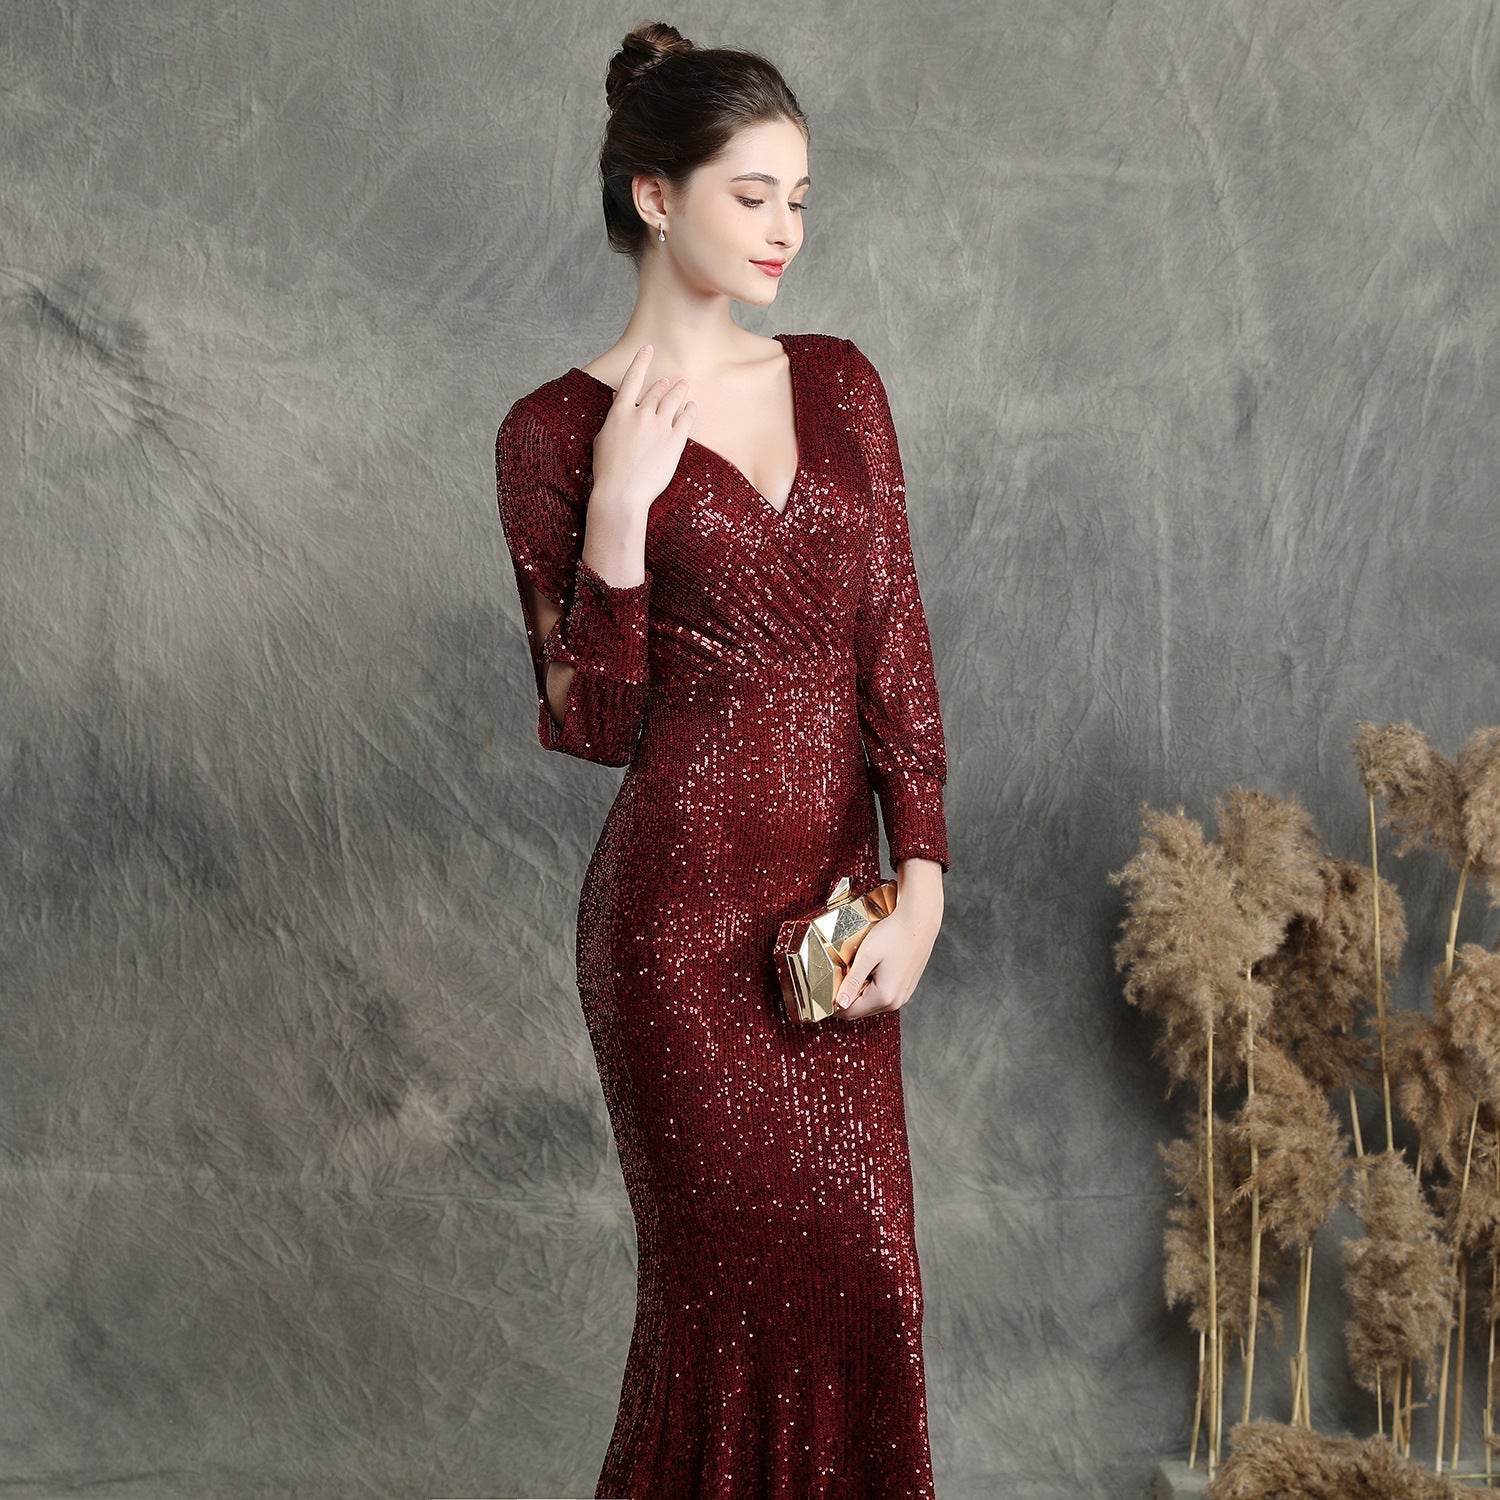 Ella long-sleeve sequined formal fishtail dress - Lady Occasions